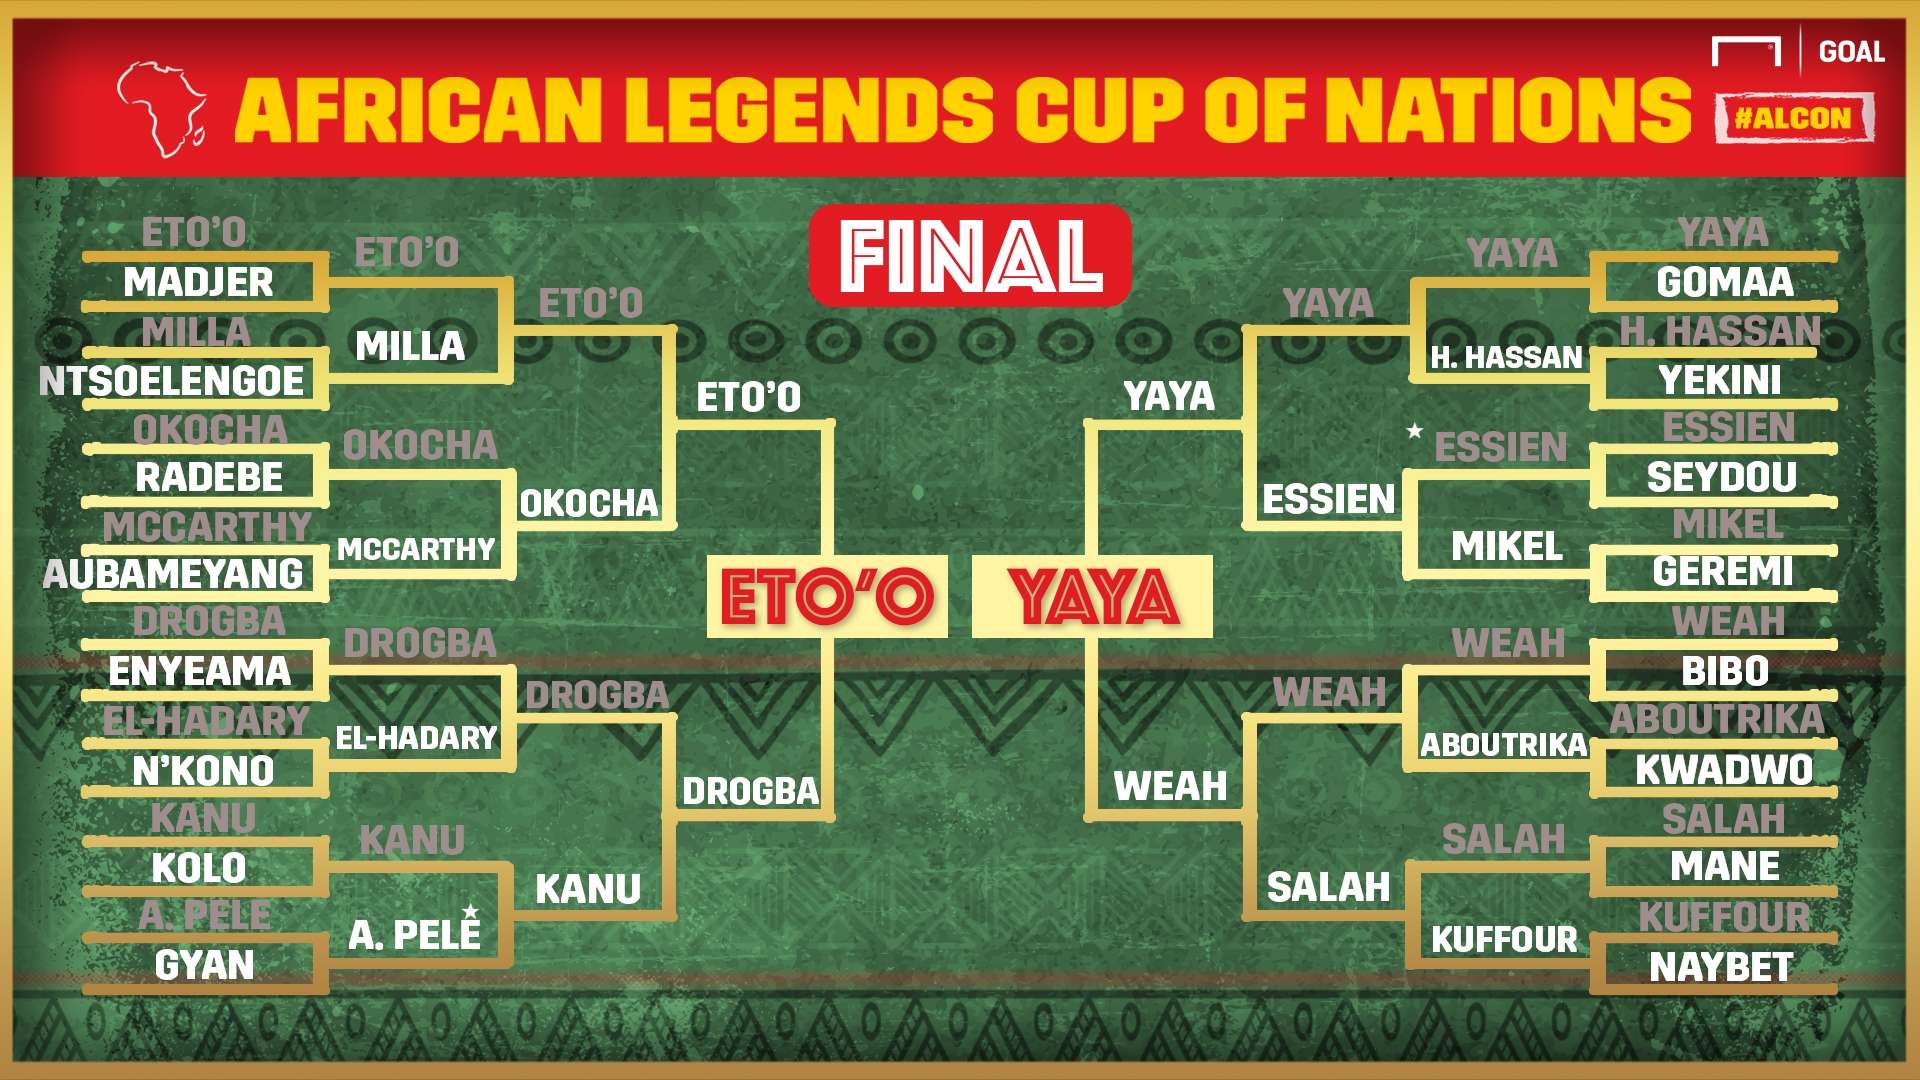 African Legends Cup of Nations Final Tree